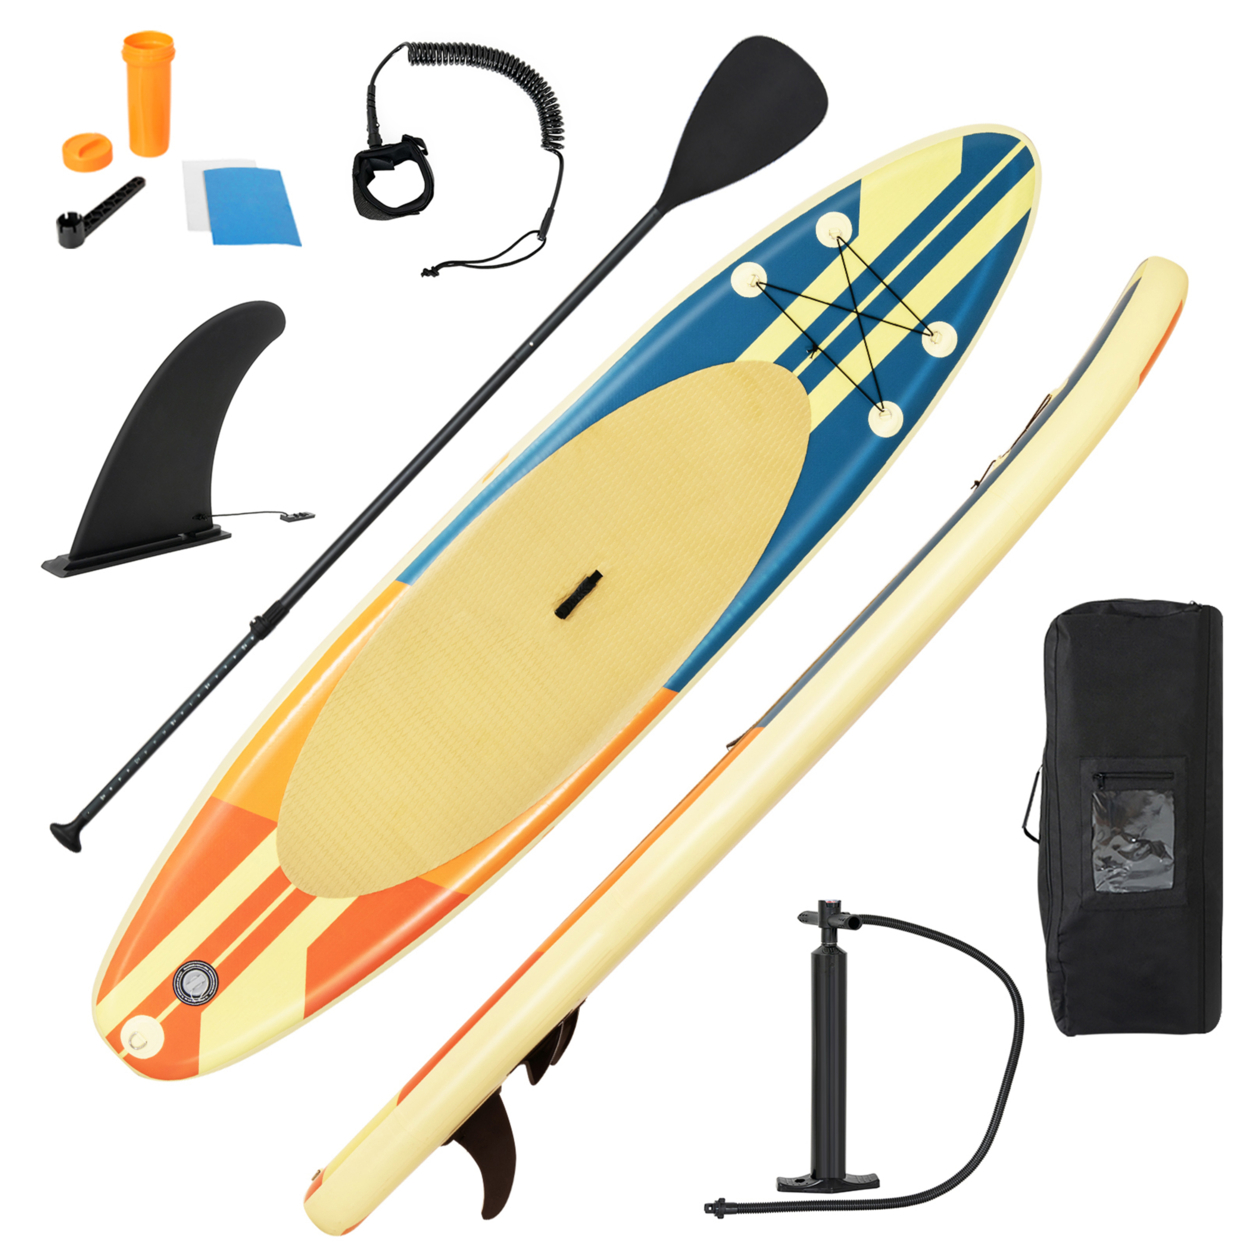 10ft Inflatable Stand-Up Paddle Board Non-Slip Deck Surfboard W/ Hand Pump